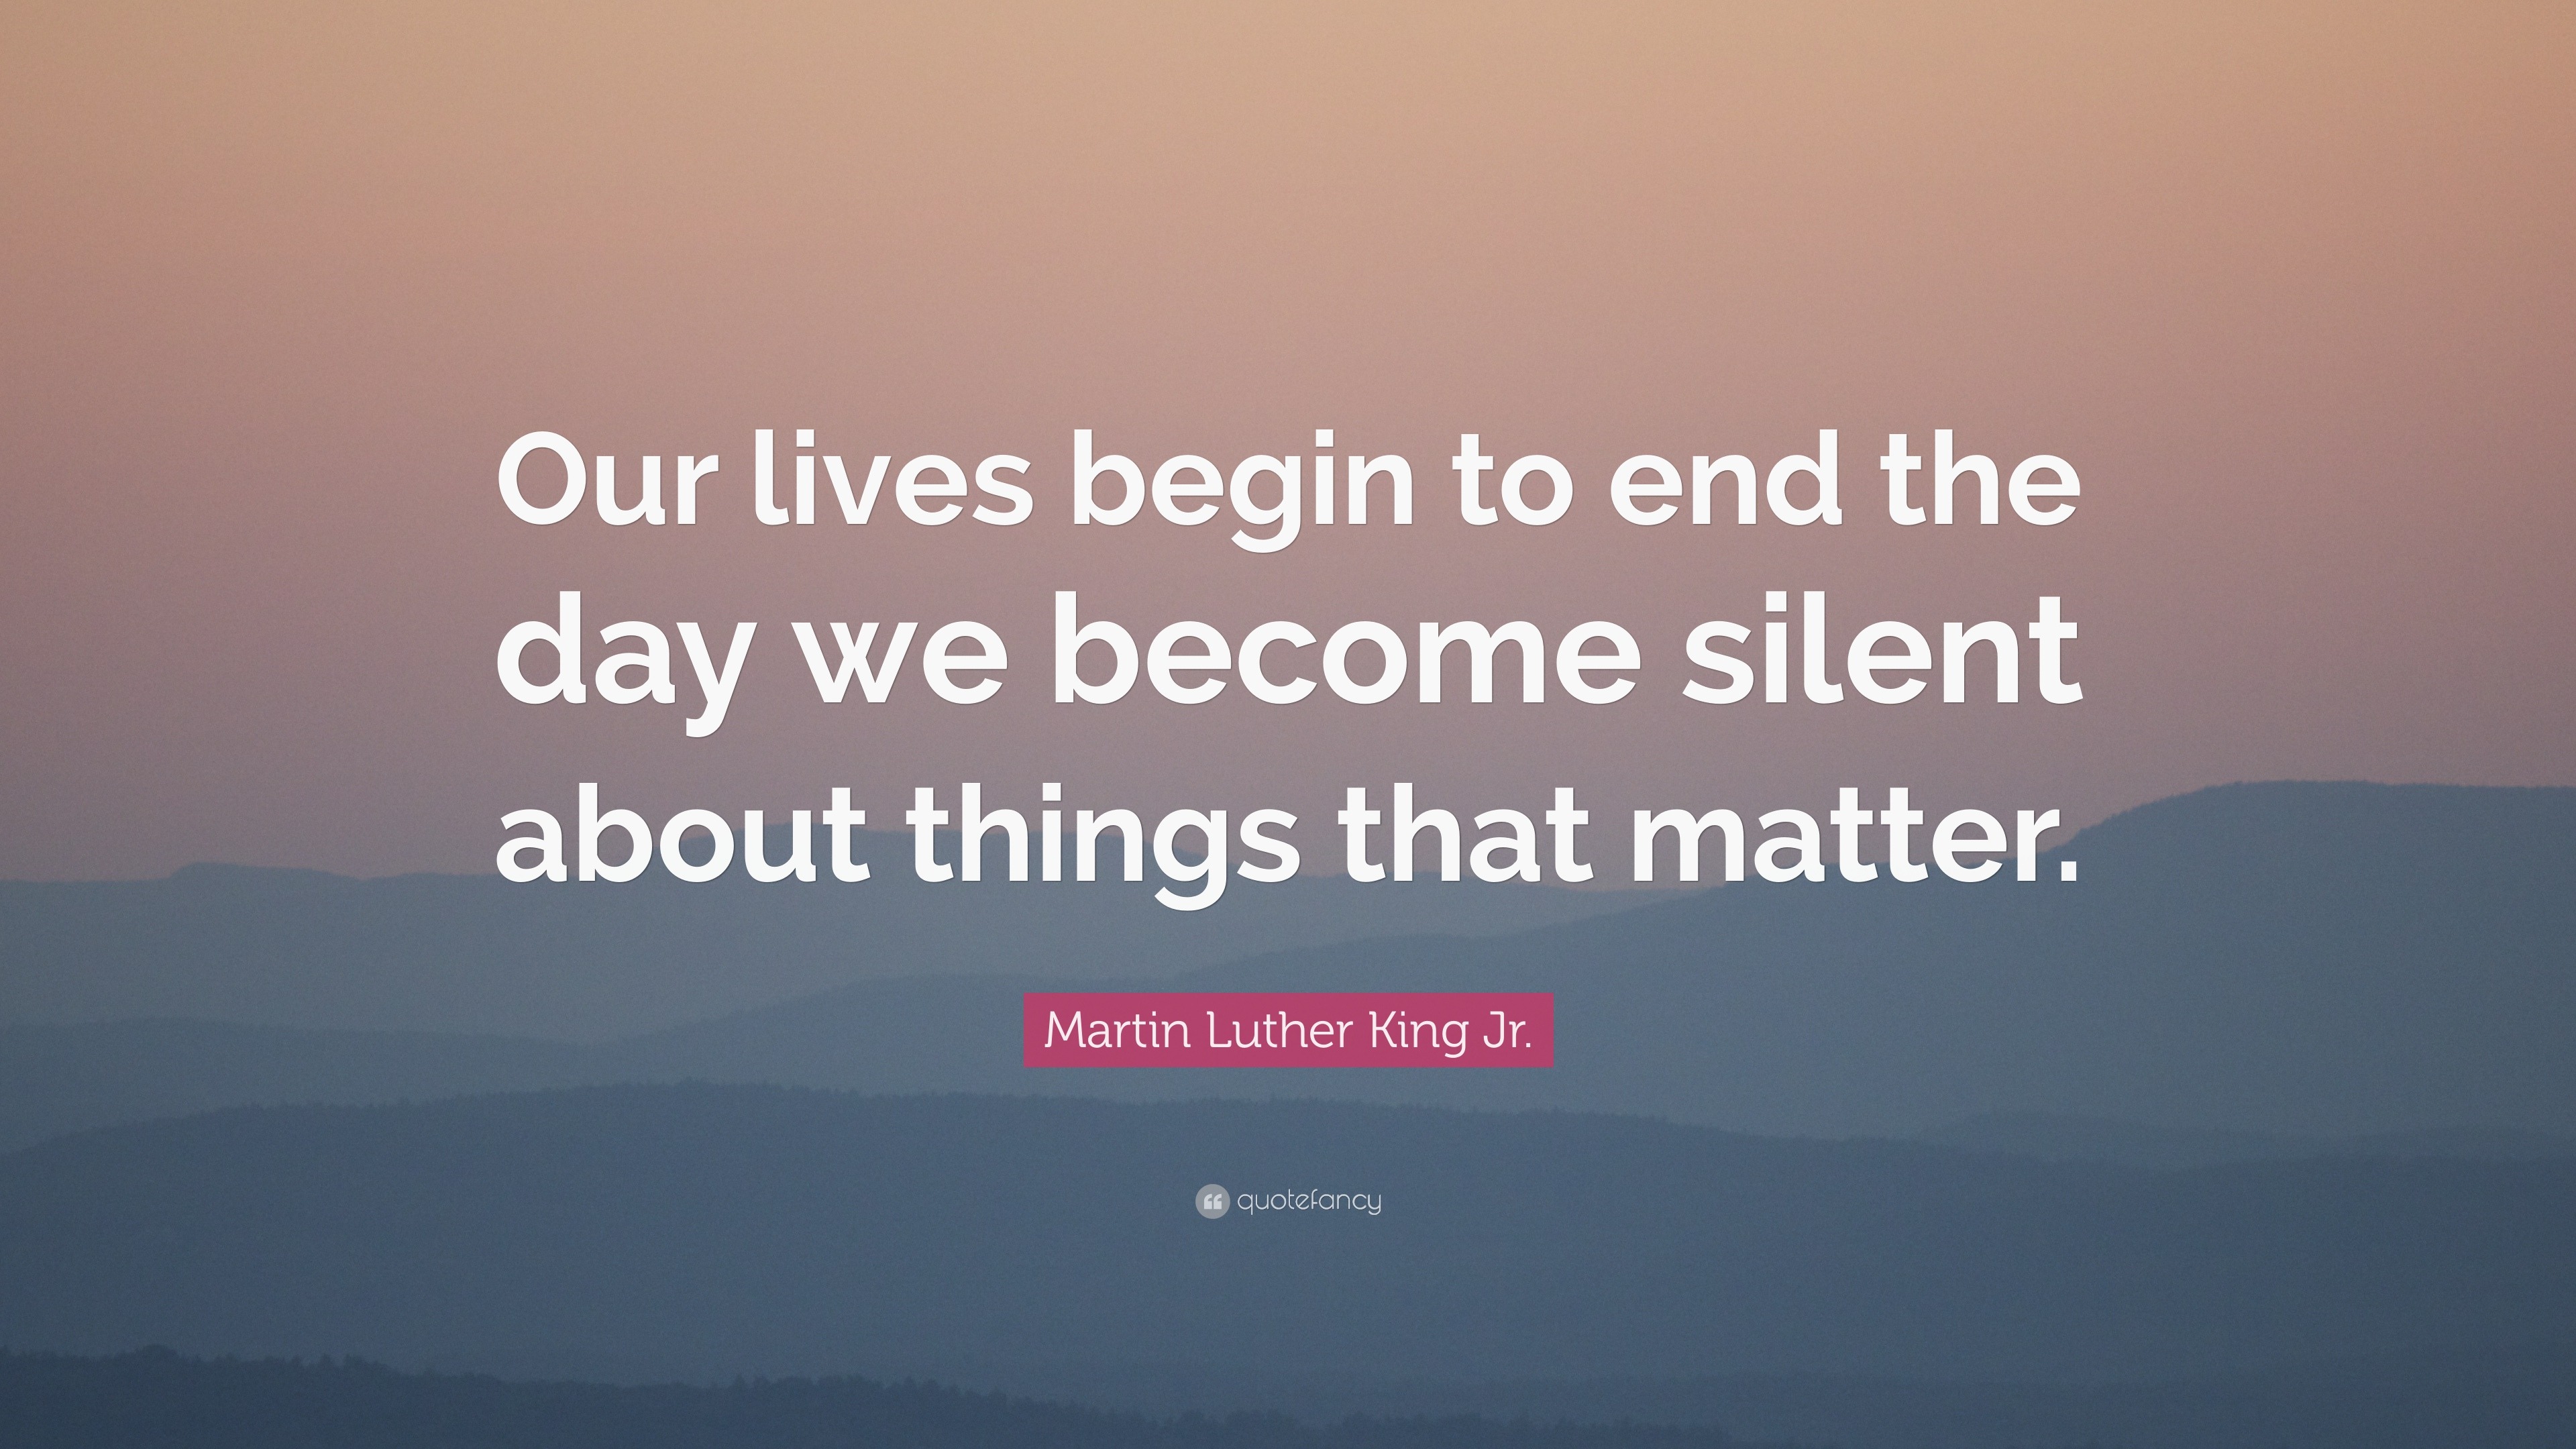 Martin Luther King Jr. Quote: “Our lives begin to end the day we become